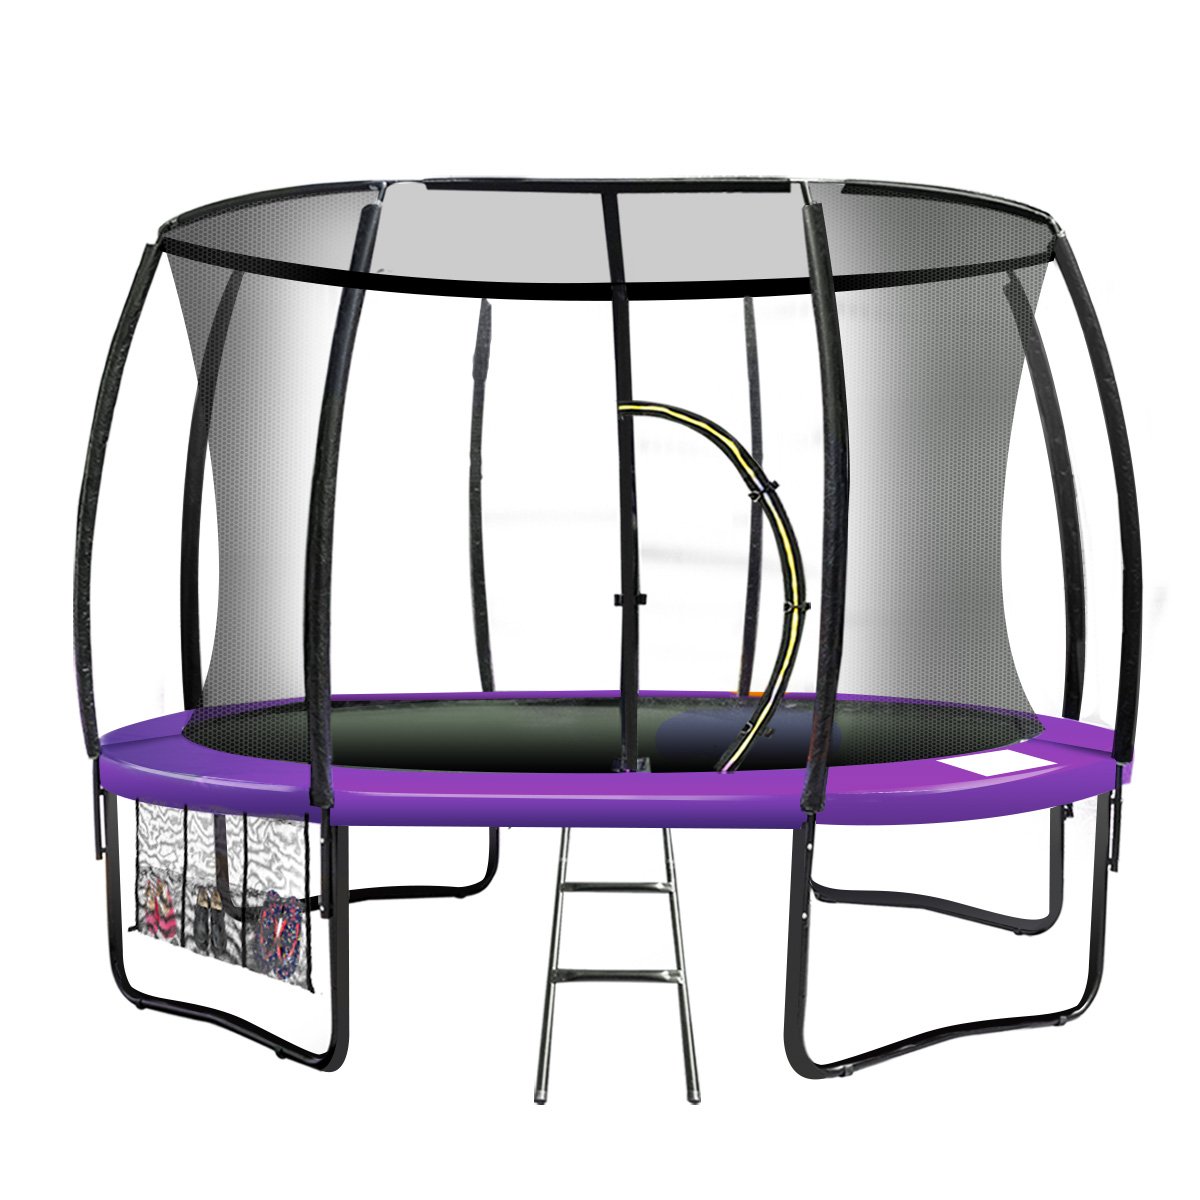 Kahuna 14ft Trampoline Free Ladder Spring Mat Net Safety Pad Cover Round Enclosure - Purple - SILBERSHELL